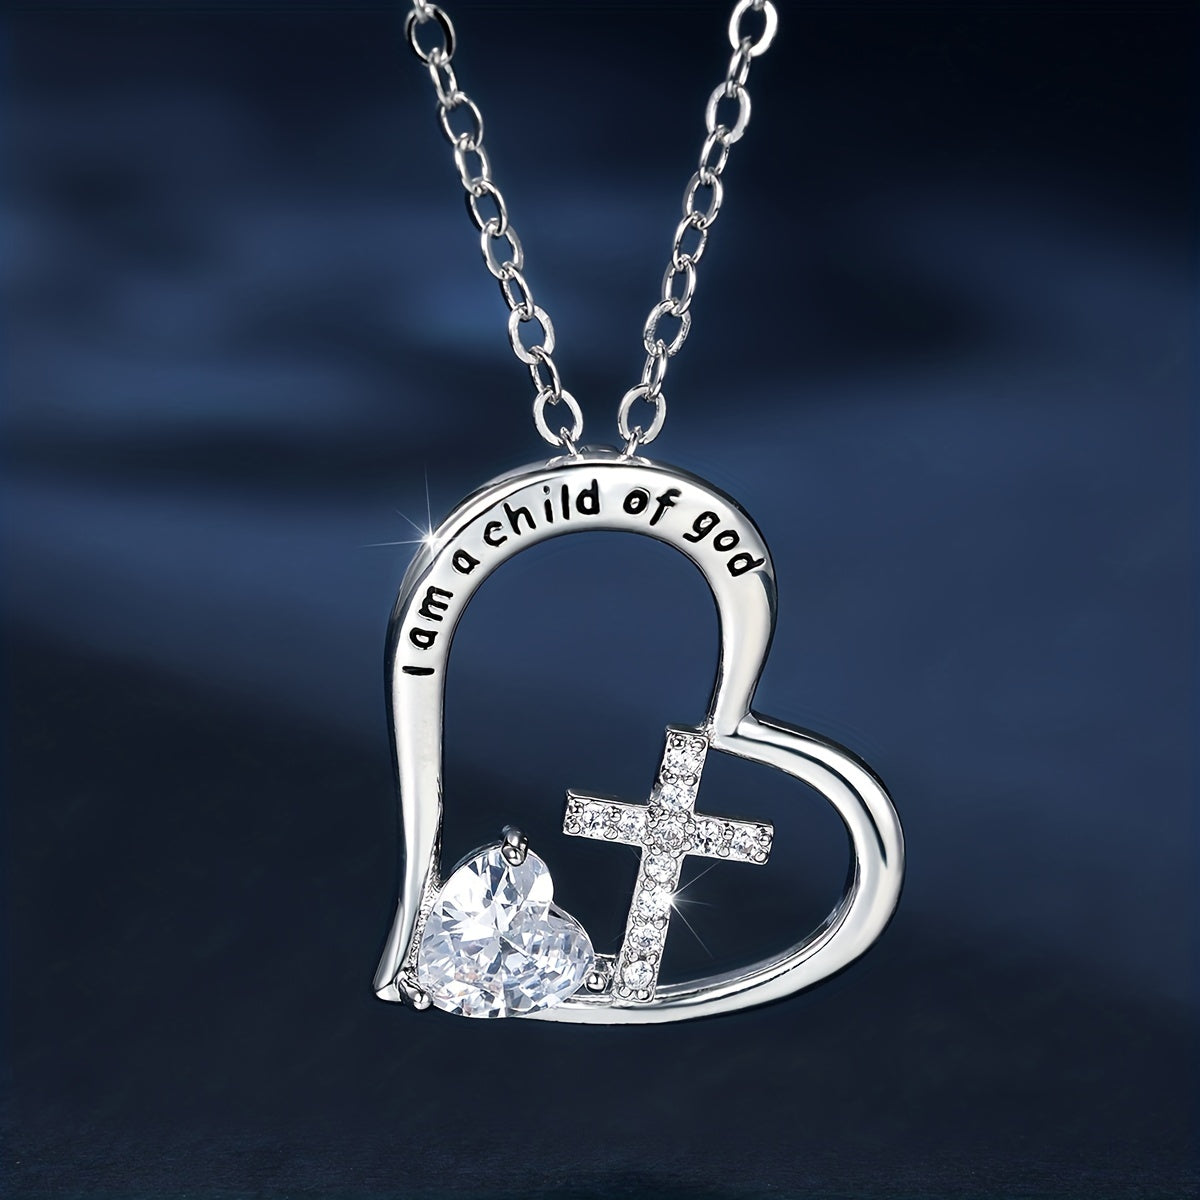 Stunning 18K Gold Plated Heart-Shaped Pendant with Cross Pattern Inlaid with Zircon - Perfect Mother's Day Gift!